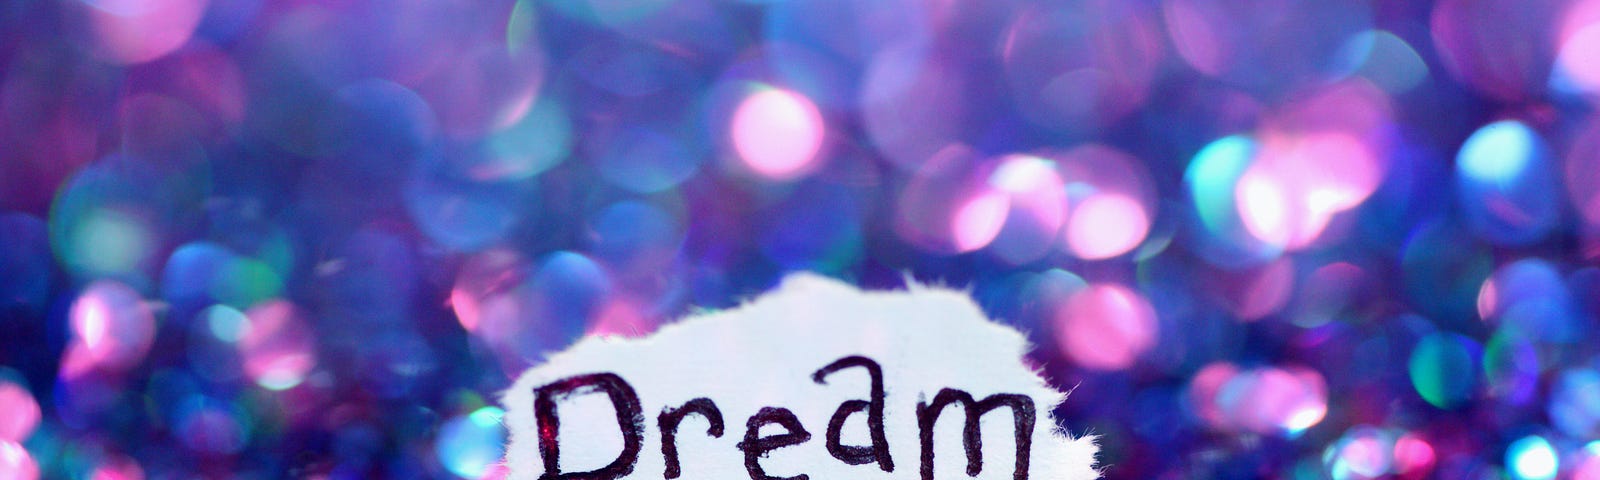 The word Dream written on paper, surrounded by shiney glitter